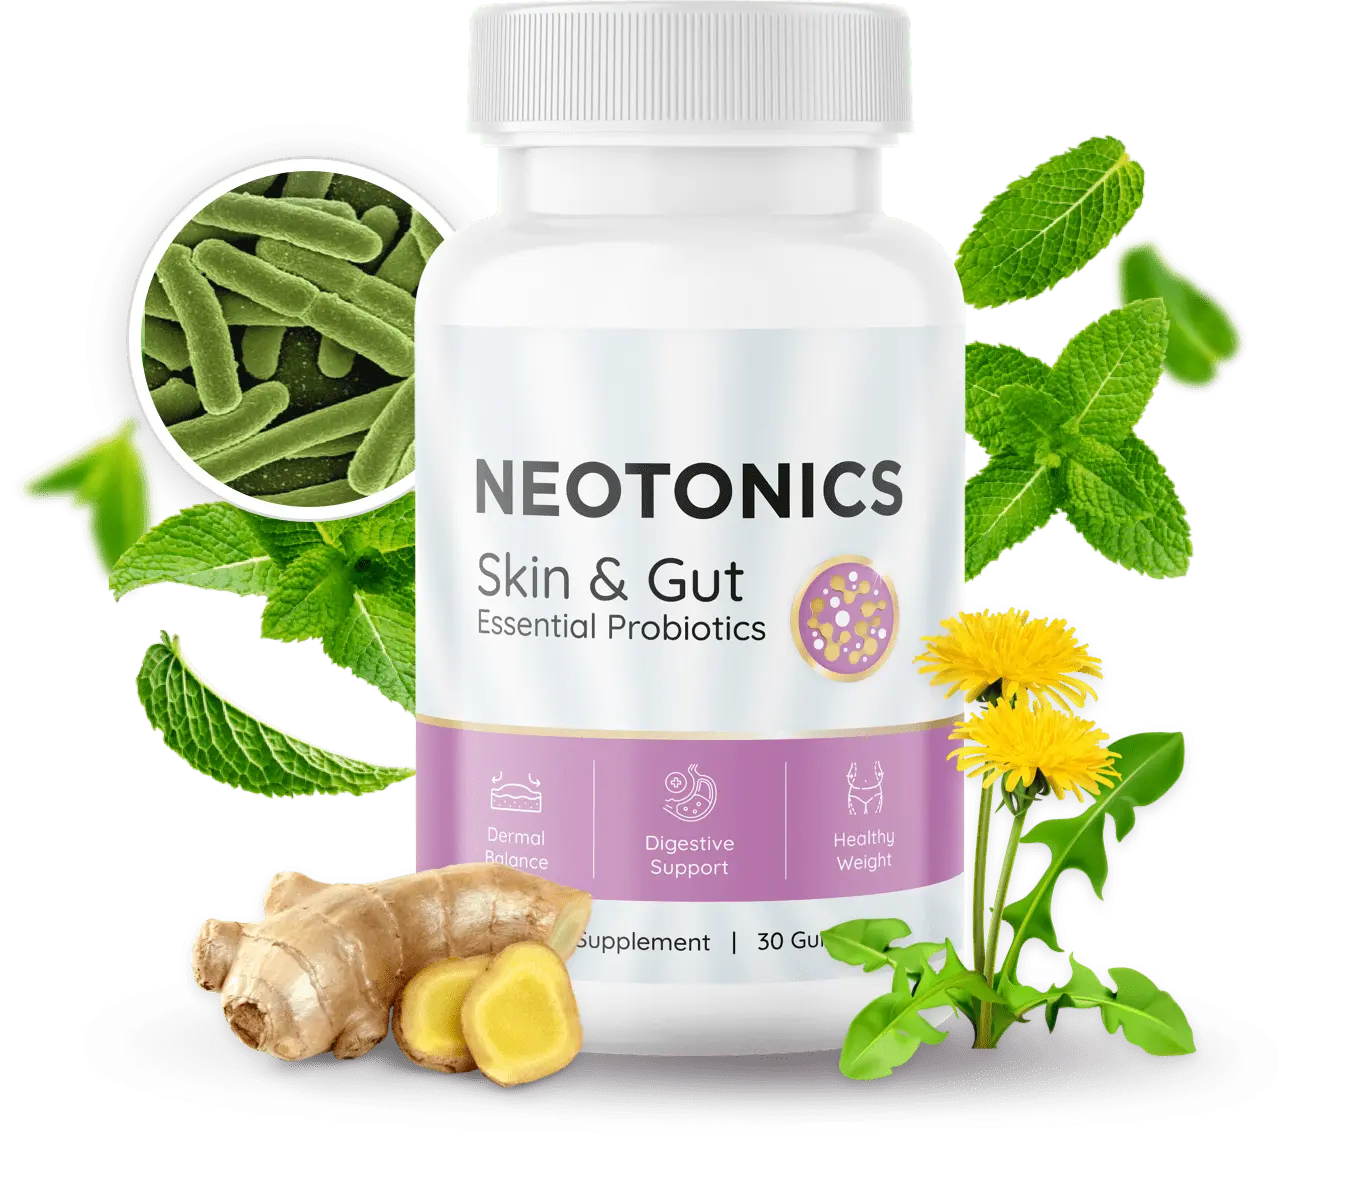 Neotonics skin and gut supplement